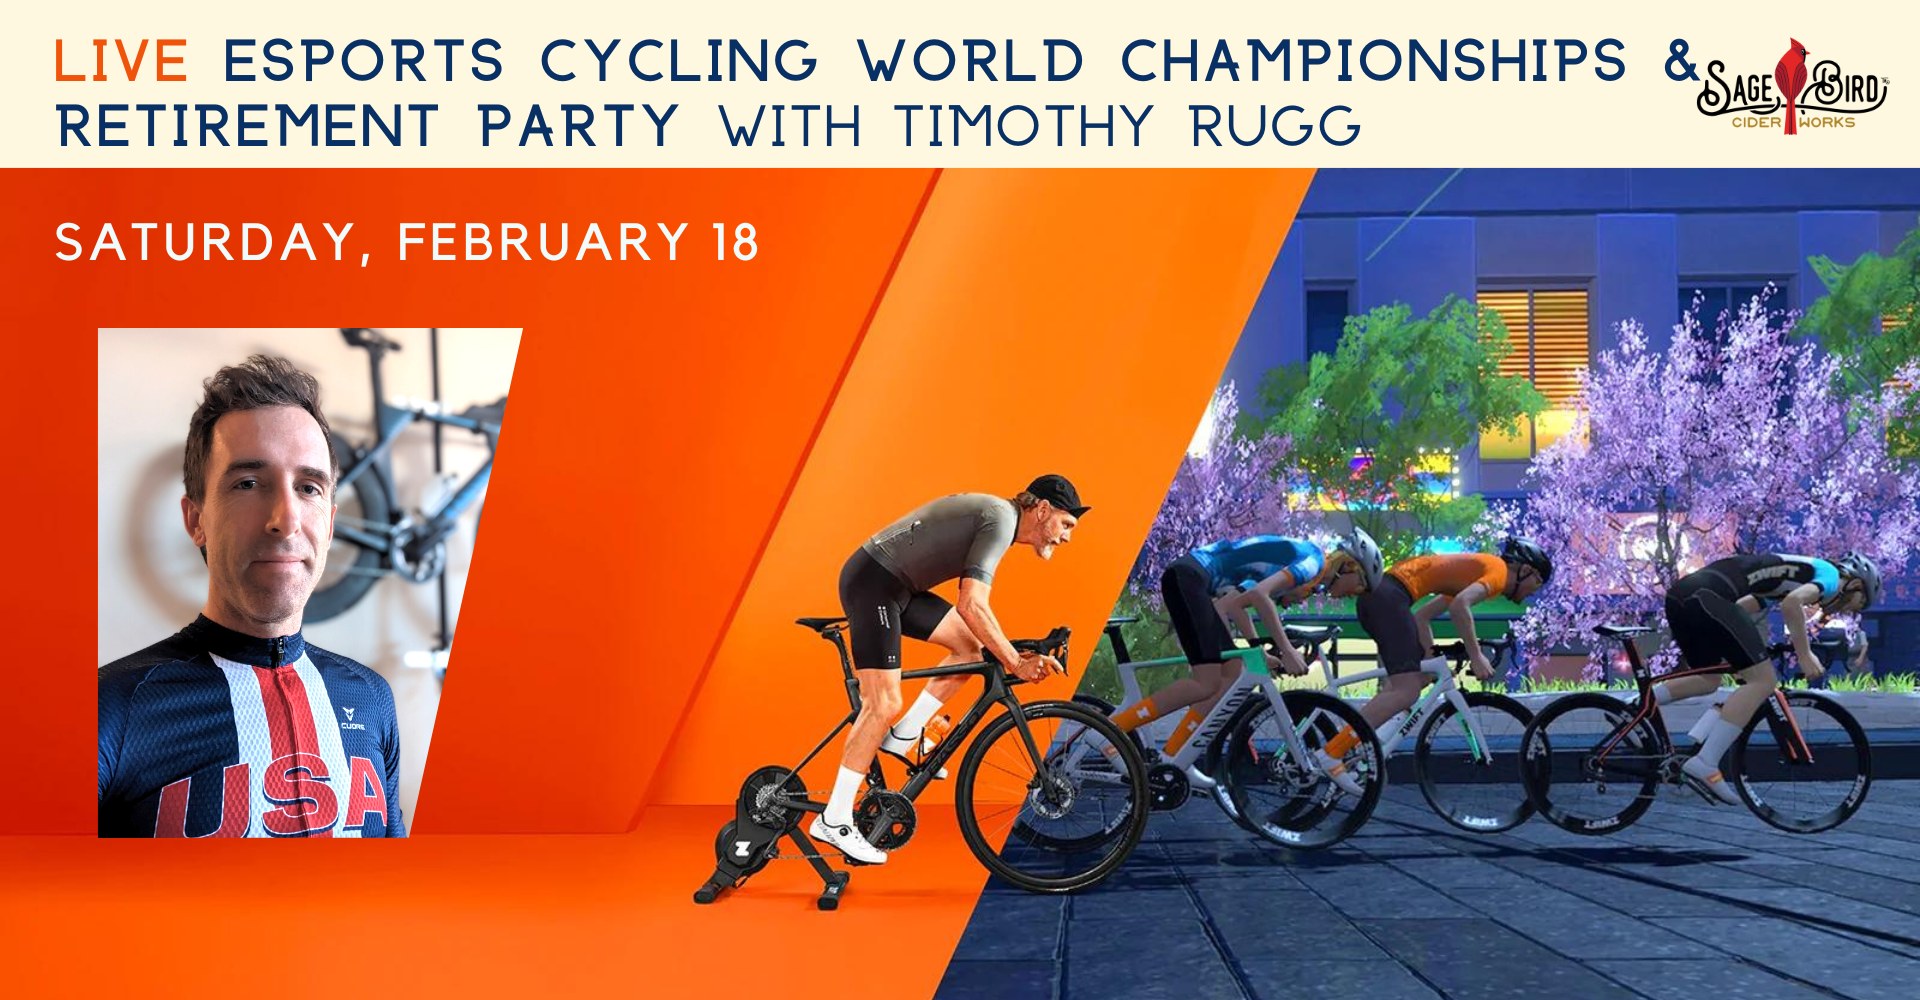 Timothy Rugg competes in eSports Cycling World Championship